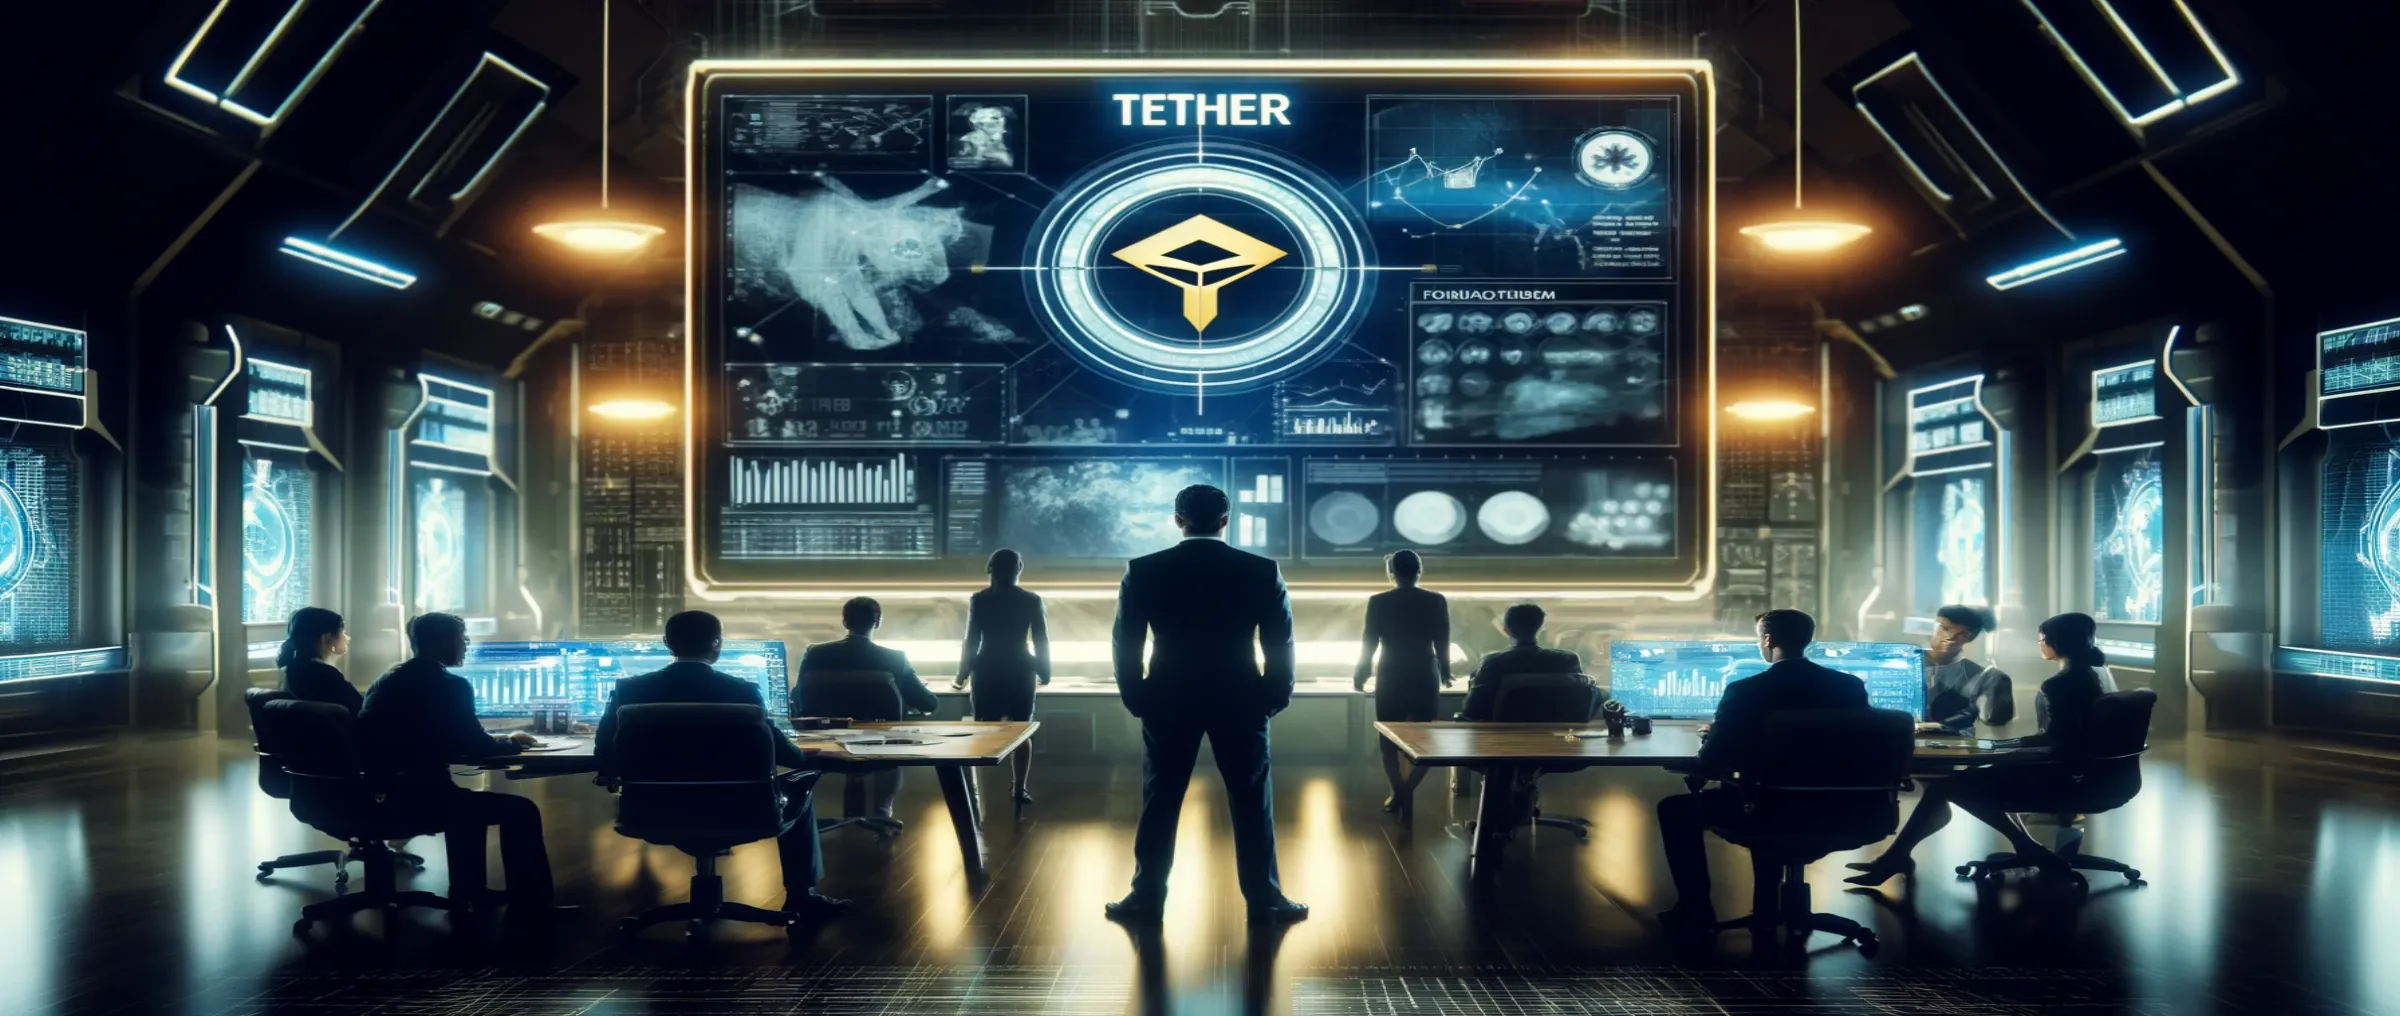 The US government is focusing on Tether as the next potential target